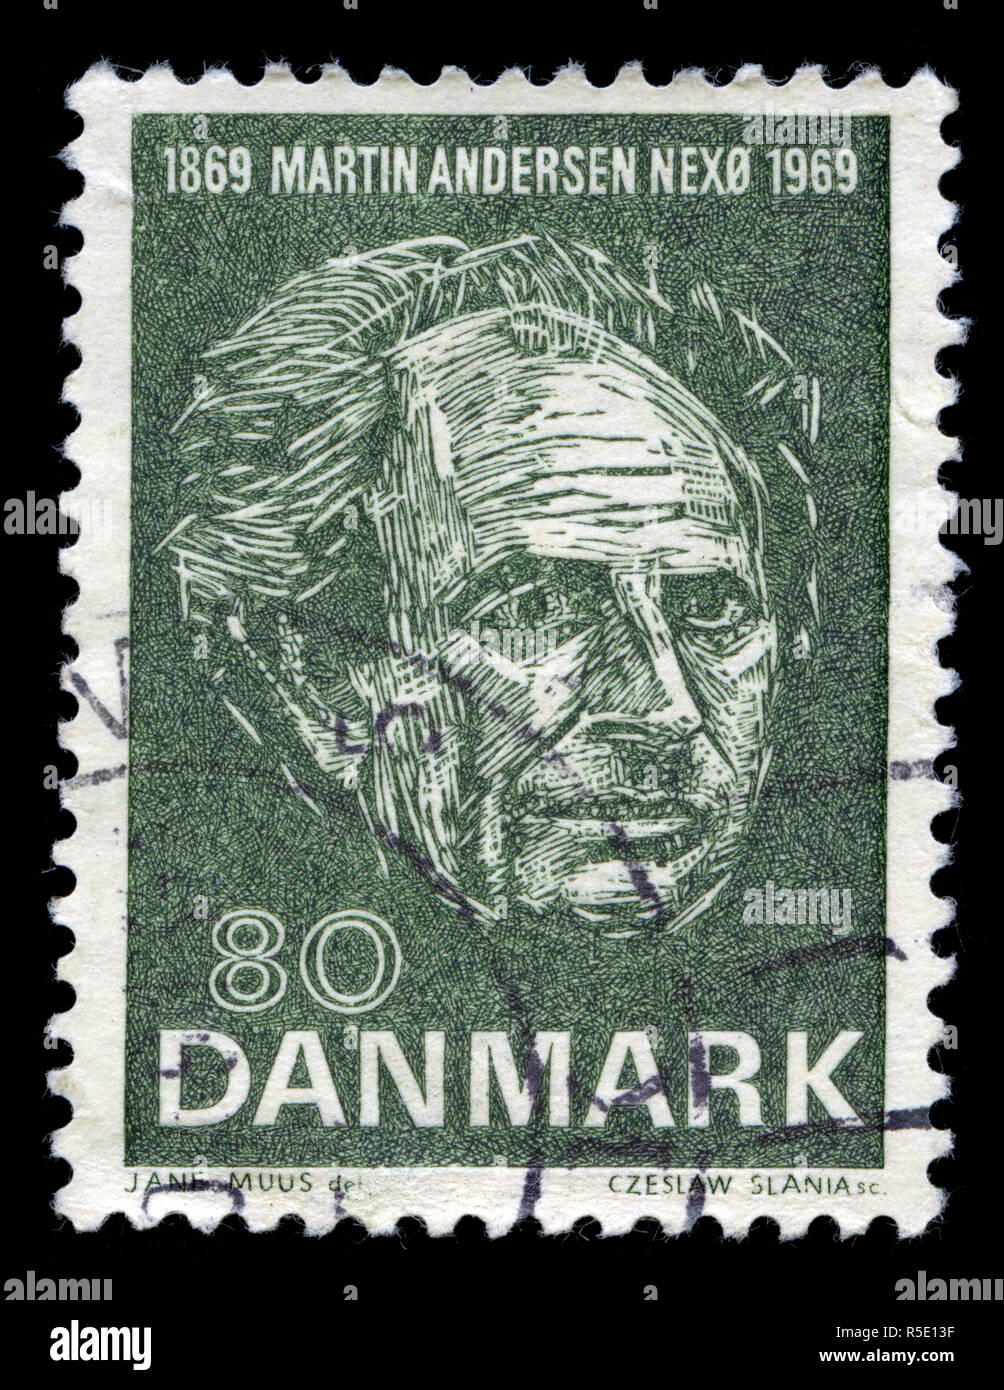 Postage stamp from Denmark in the Martin Andersen Nexø (poet, writer) series issued in 1969 Stock Photo